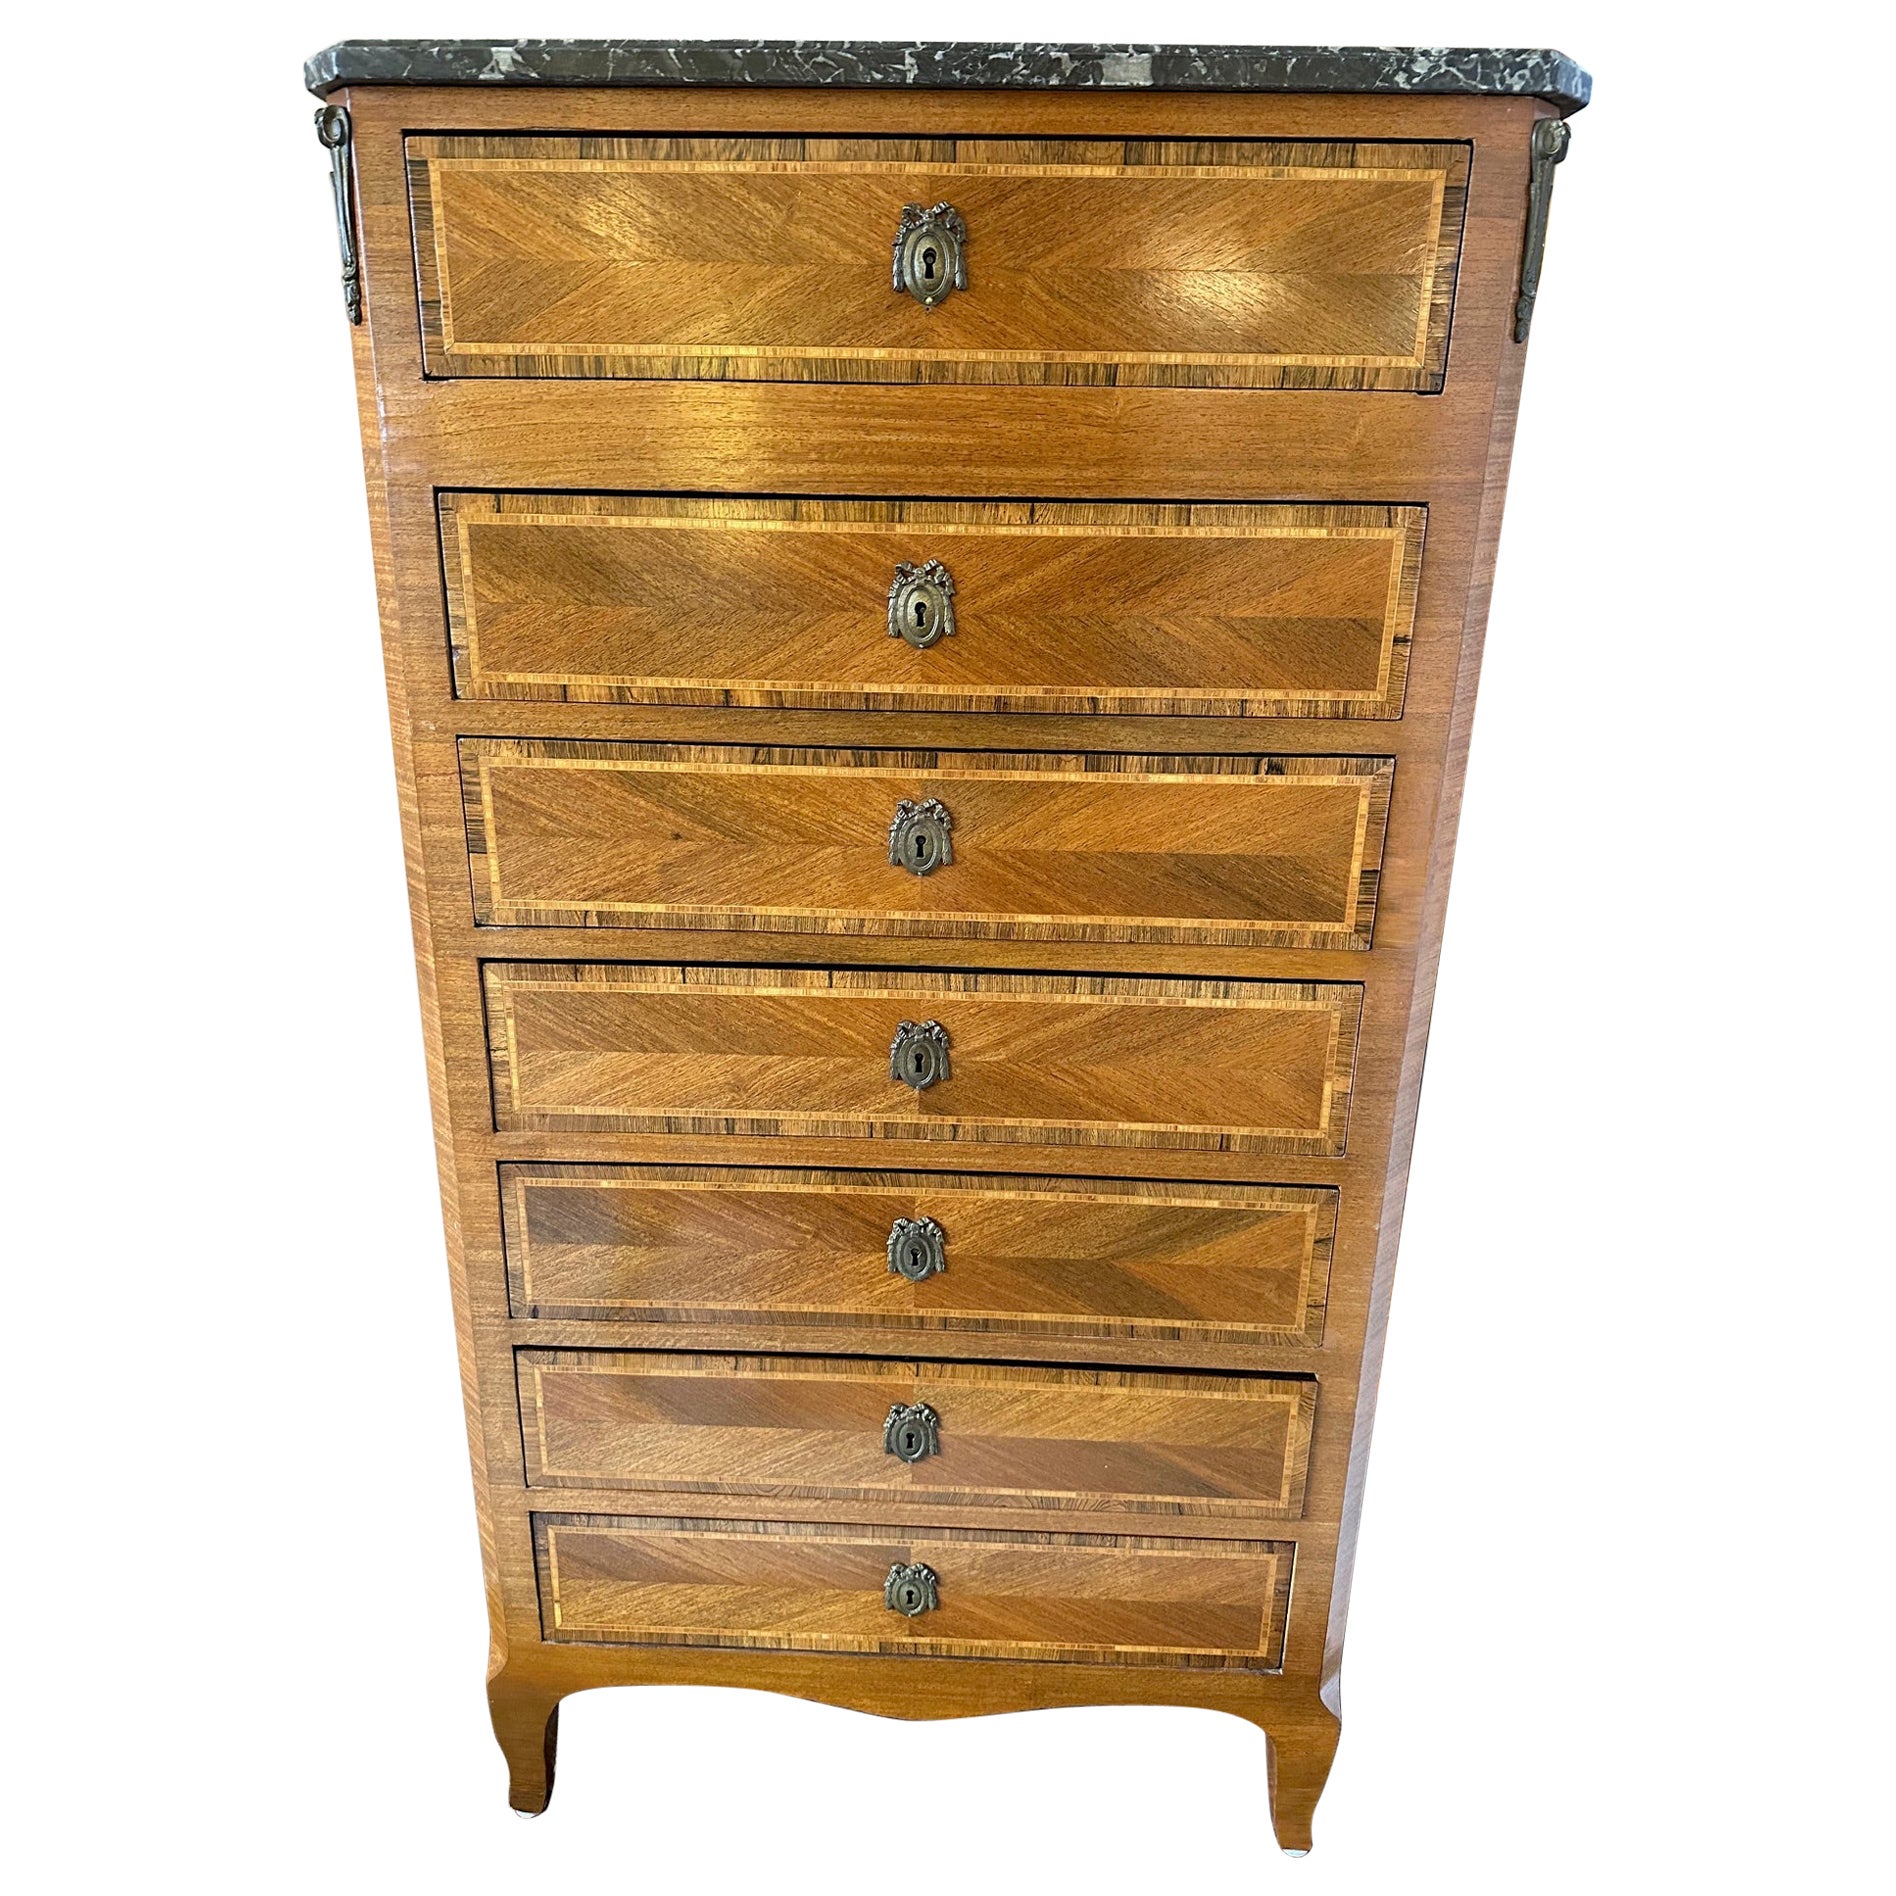 19th Century Mixed Wood Inlaid Lingerie Chest of Drawers with Marble Top For Sale